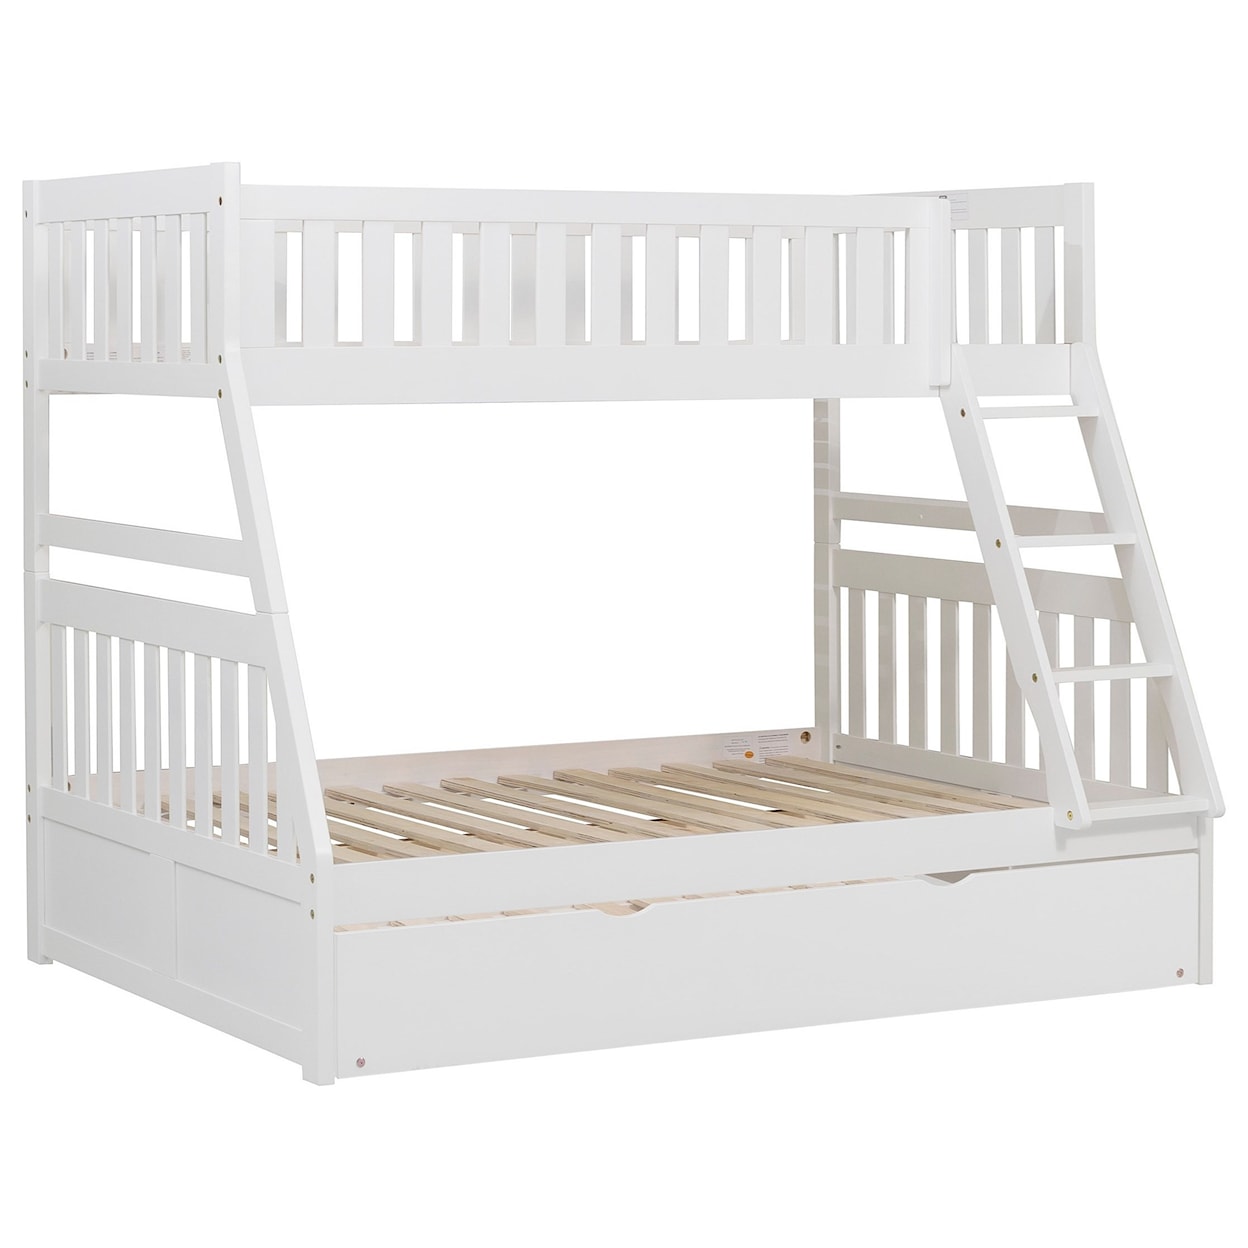 Homelegance Furniture Discovery Twin Over Full Trundle Bunk Bed